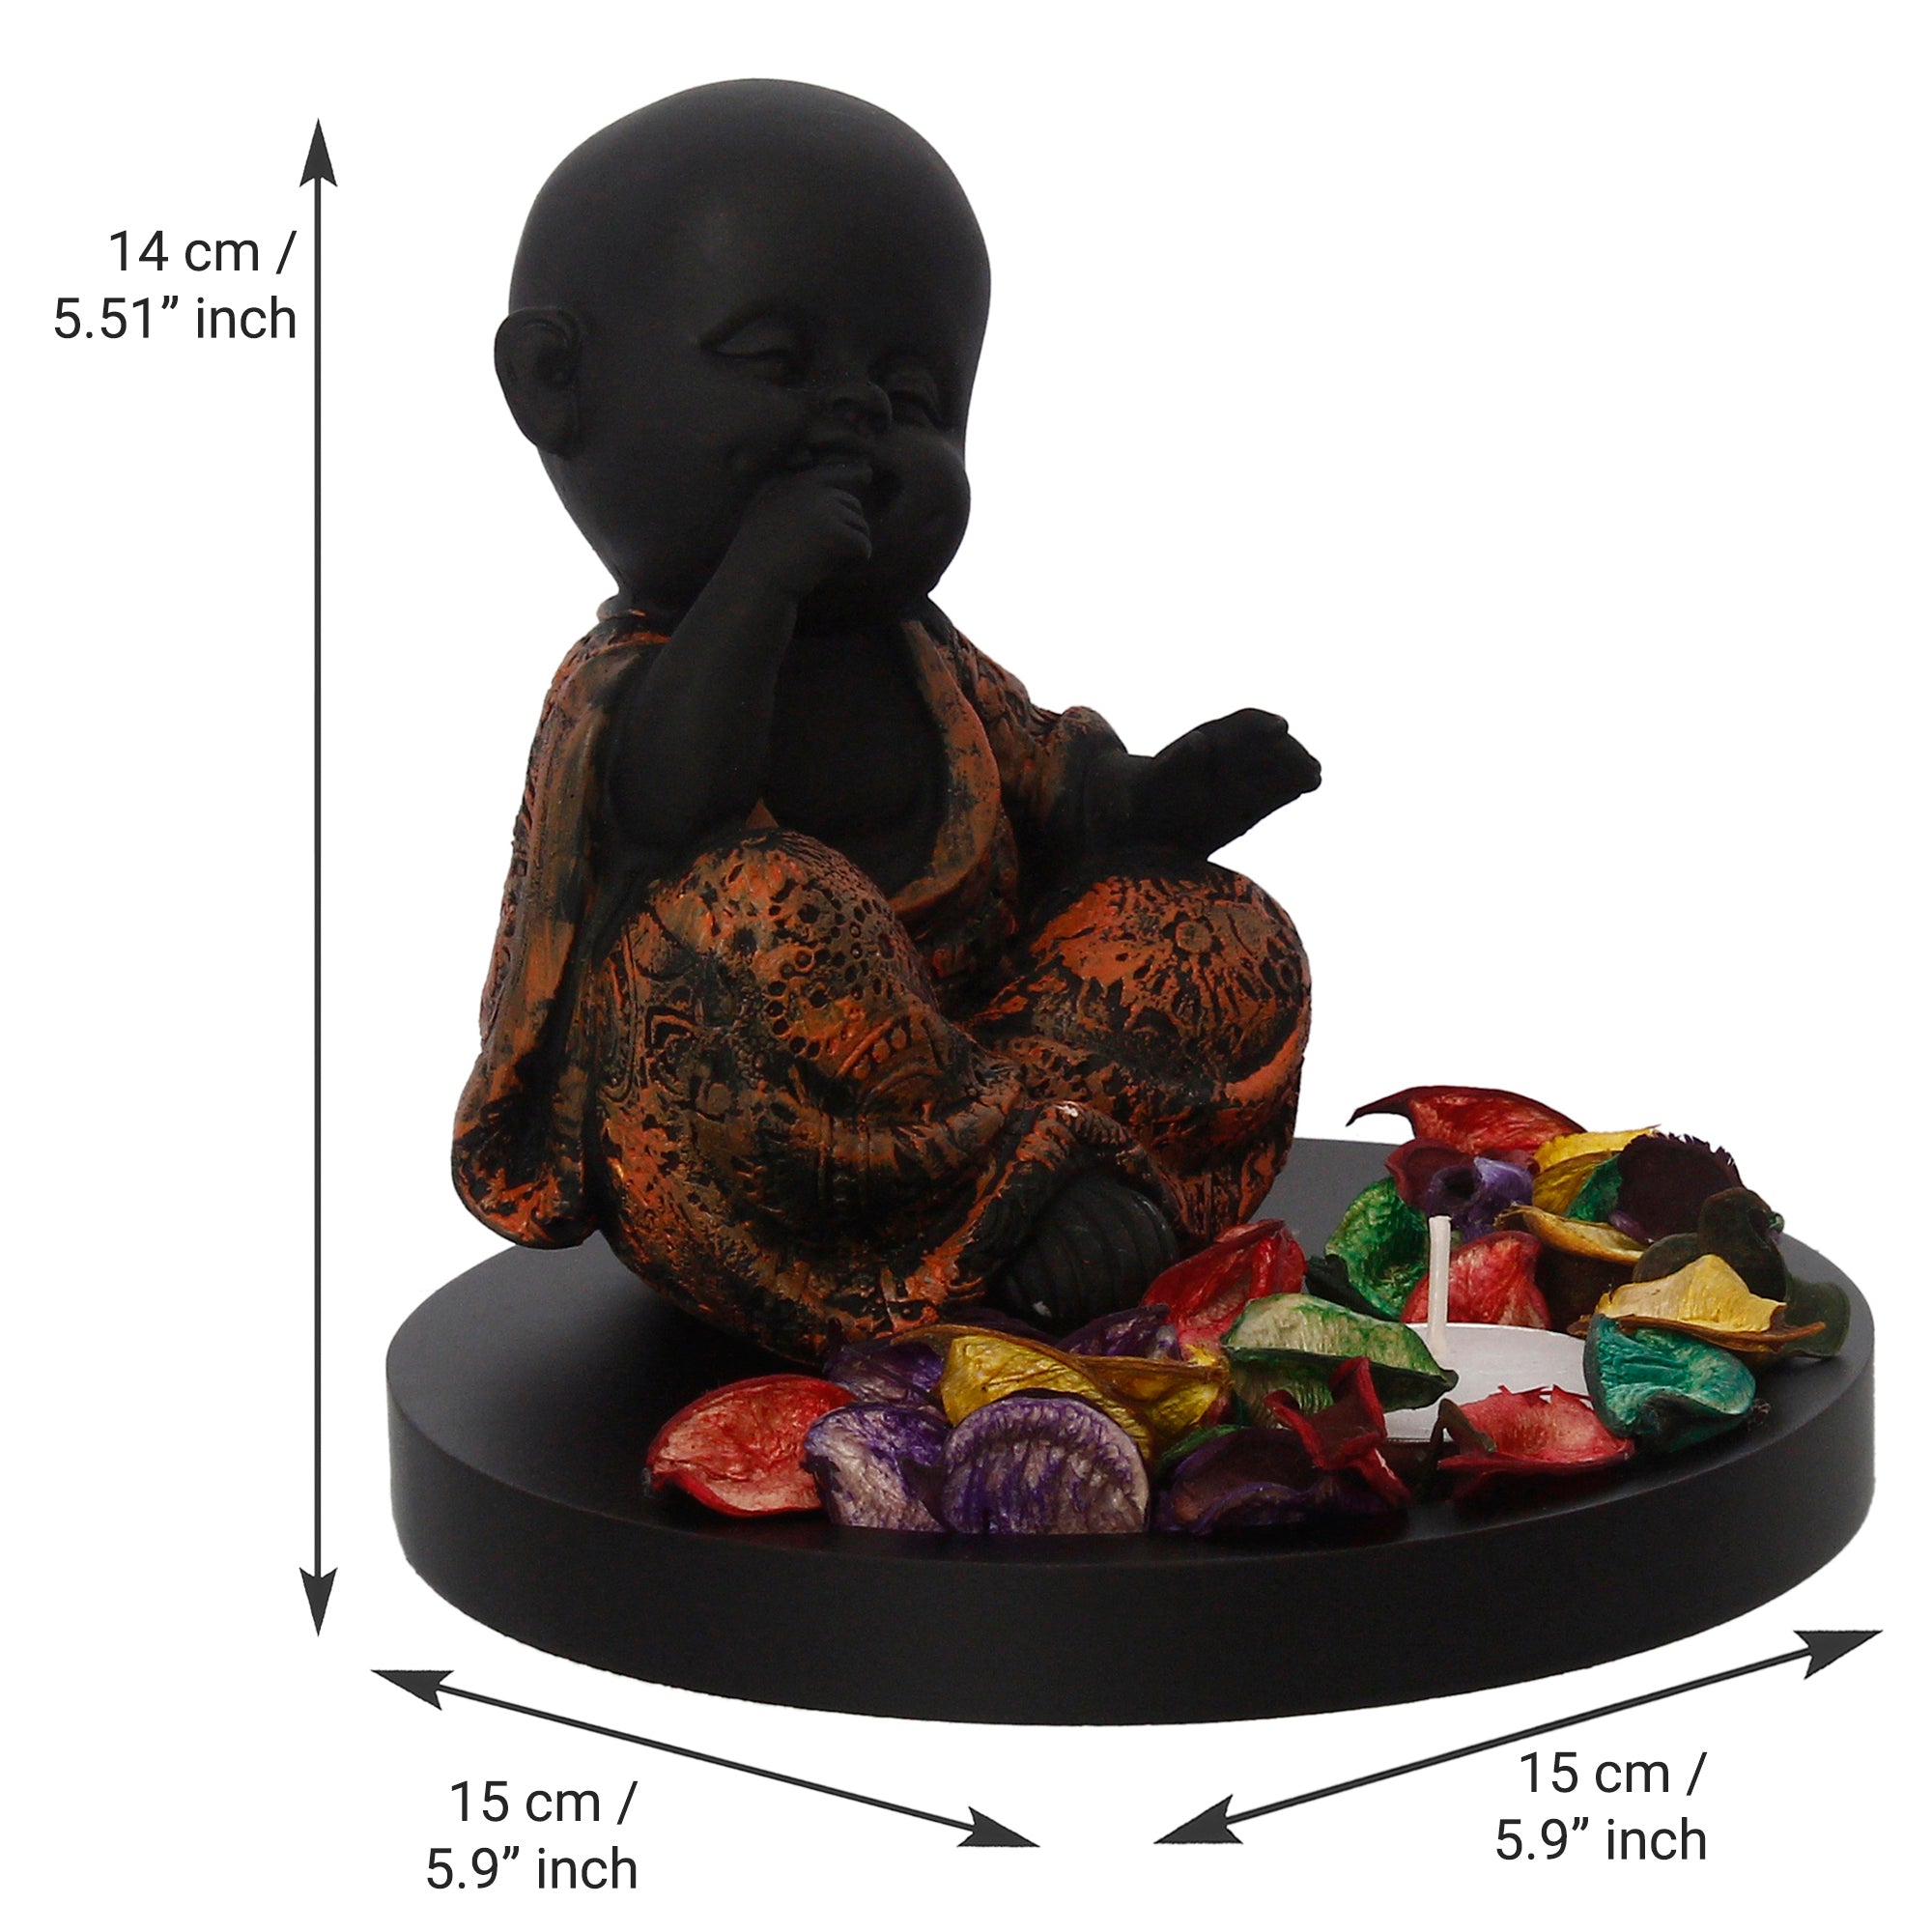 Decorative Smiling Copper Monk Buddha with Wooden Base, Fragranced Petals and Tealight 3